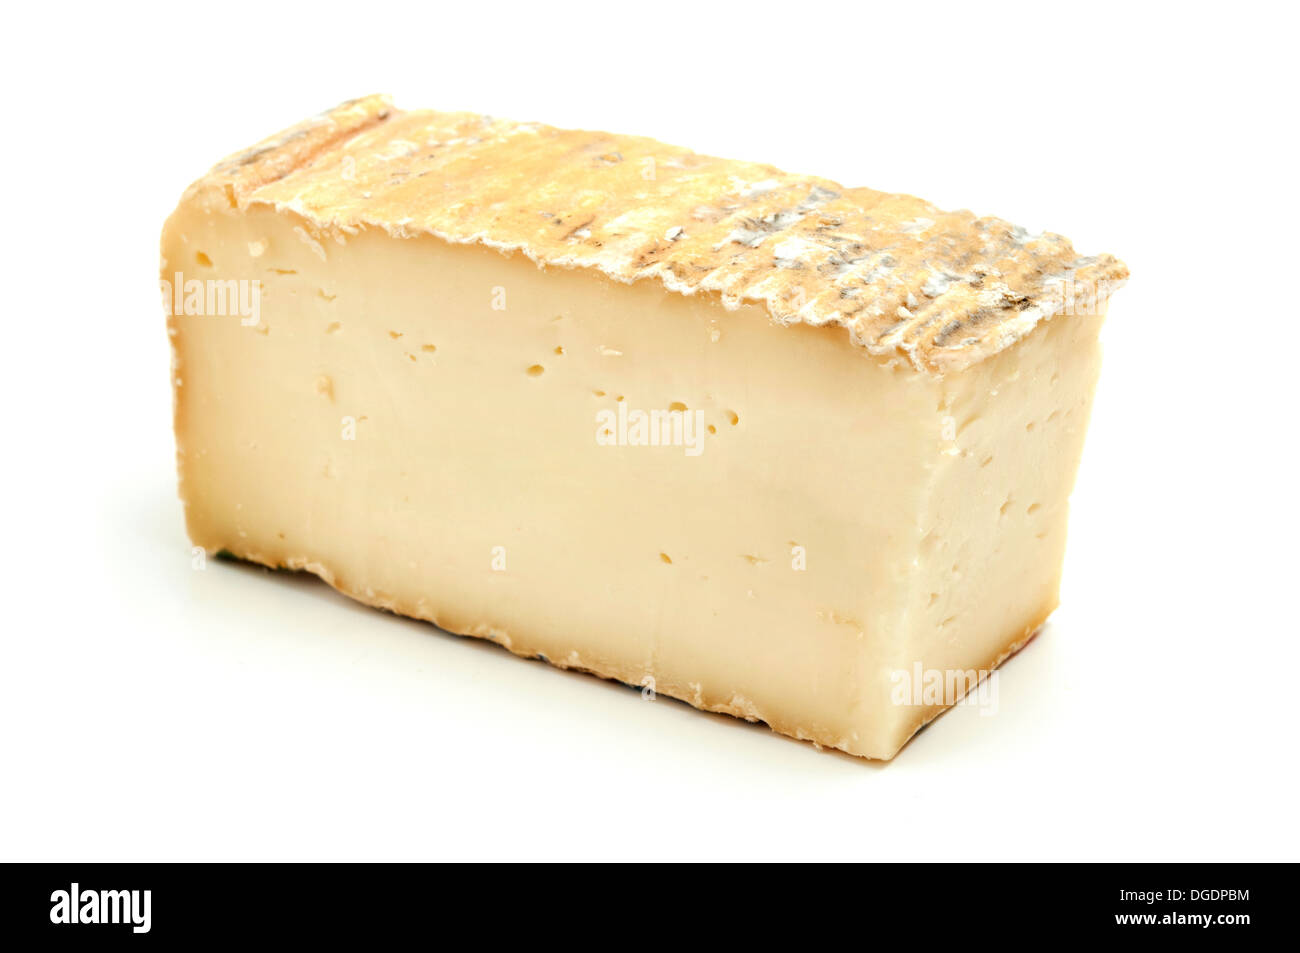 Fromage Taleggio sur fond blanc Banque D'Images